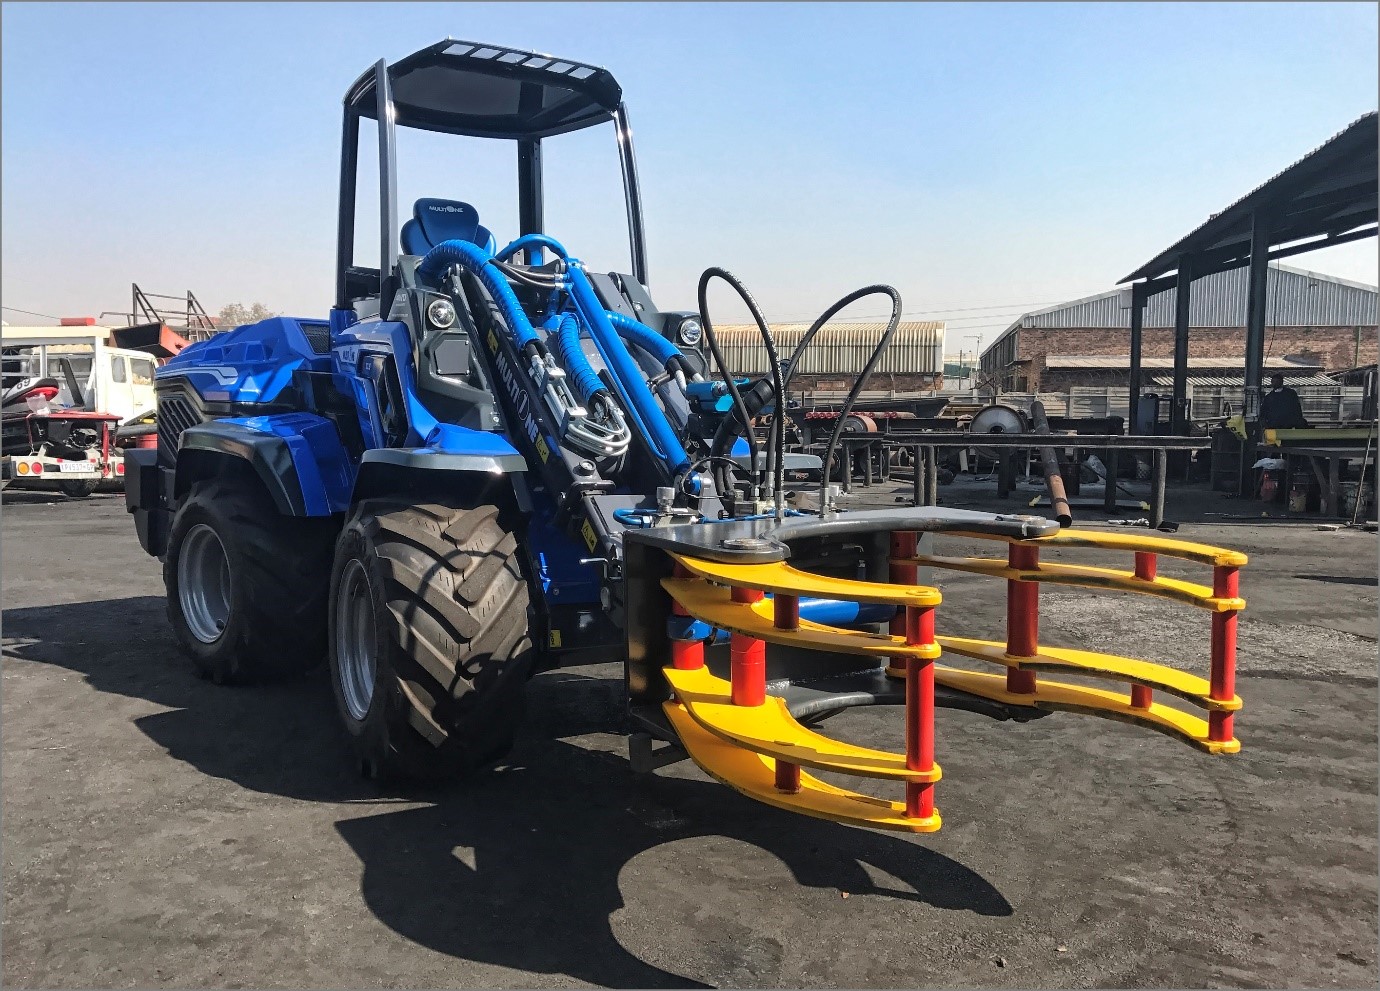 MultiOne SA introduces new Hydraulic attachments for mini loaders